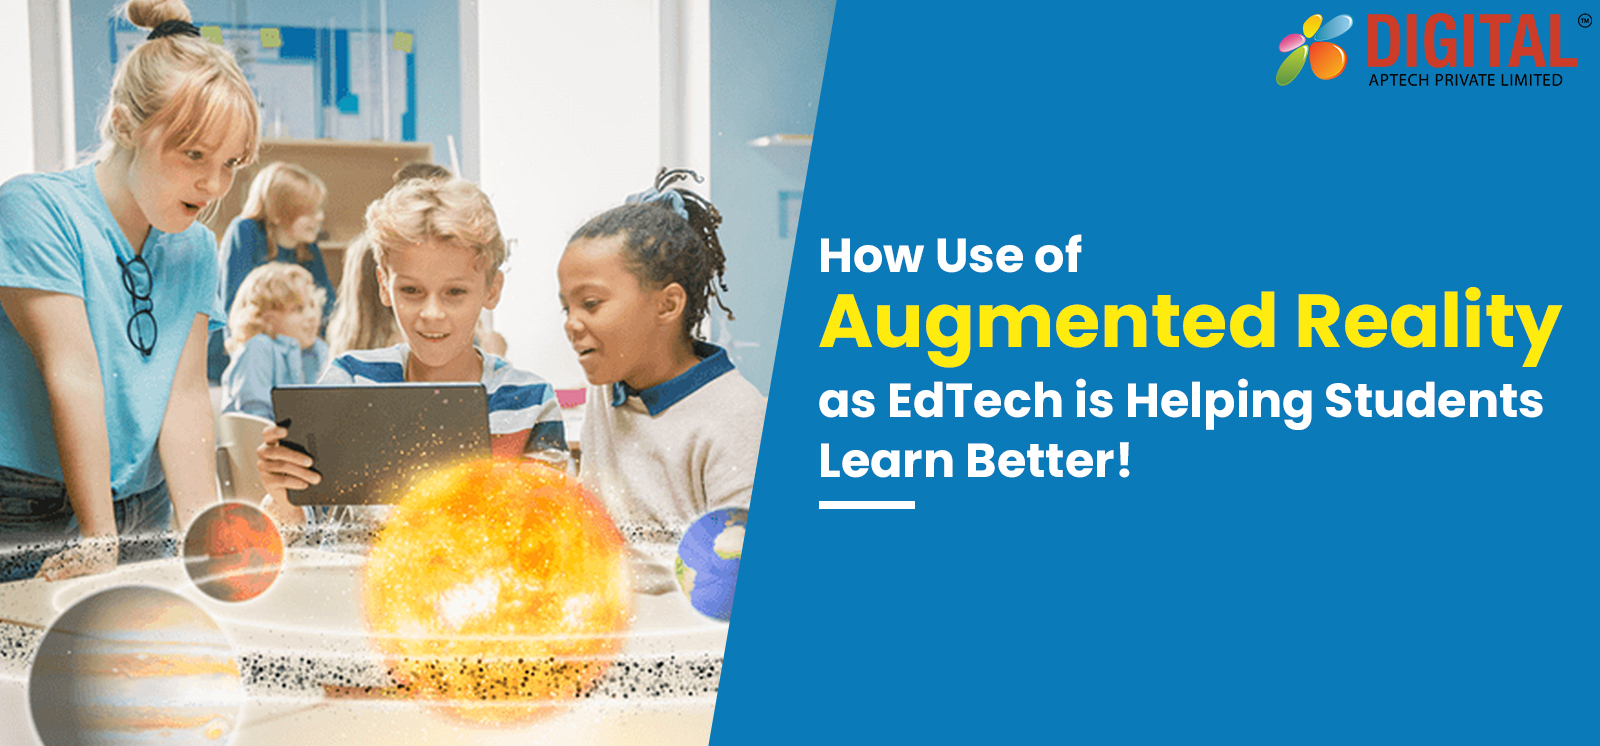 How Use of Augmented Reality as EdTech is Helping Students Learn Better